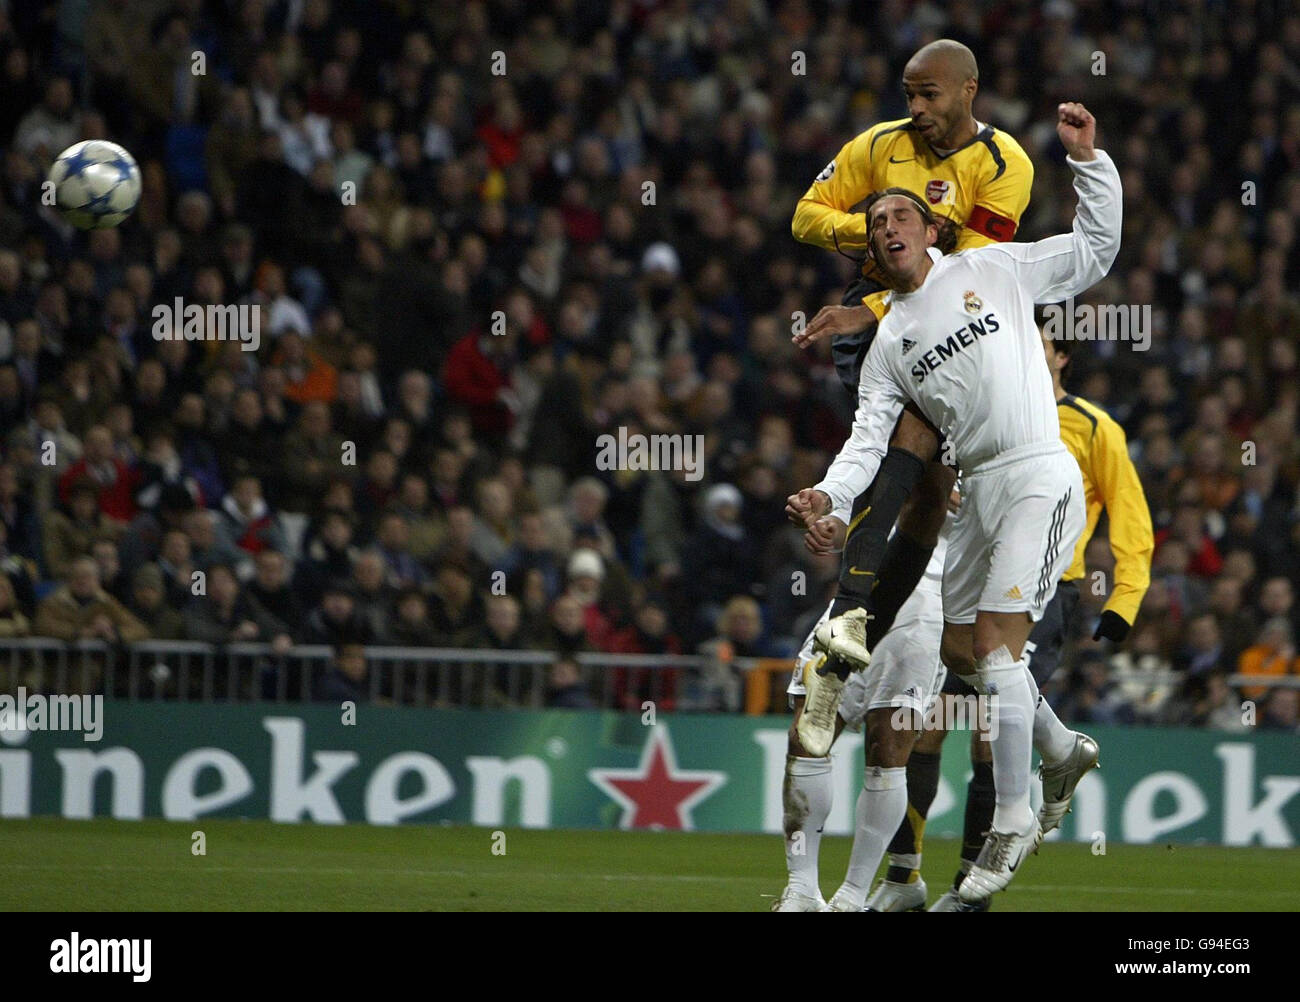 Arsenal's Thierry Henry (top) rises above Real Madrid's Ramos Sergio to put a header just wide during the UEFA Champions League match at the Santiago Bernabeu, Madrid, Spain, Tuesday February 21, 2006. PRESS ASSOCIATION Photo. Photo credit should read: Nick Potts/PA. Stock Photo